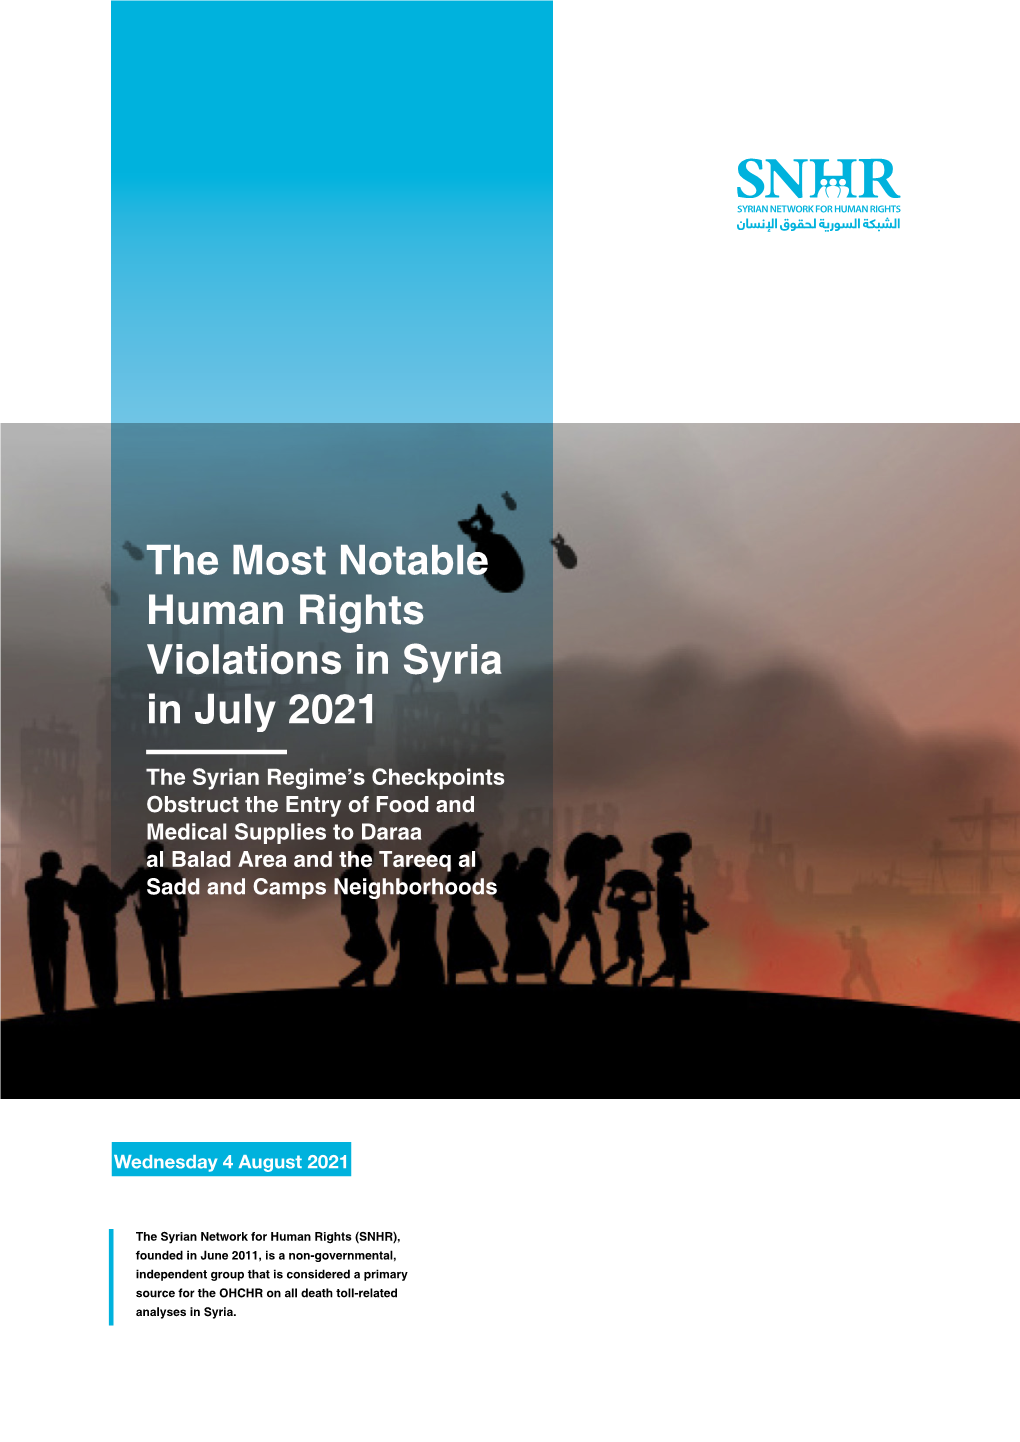 The Most Notable Human Rights Violations in Syria in July 2021